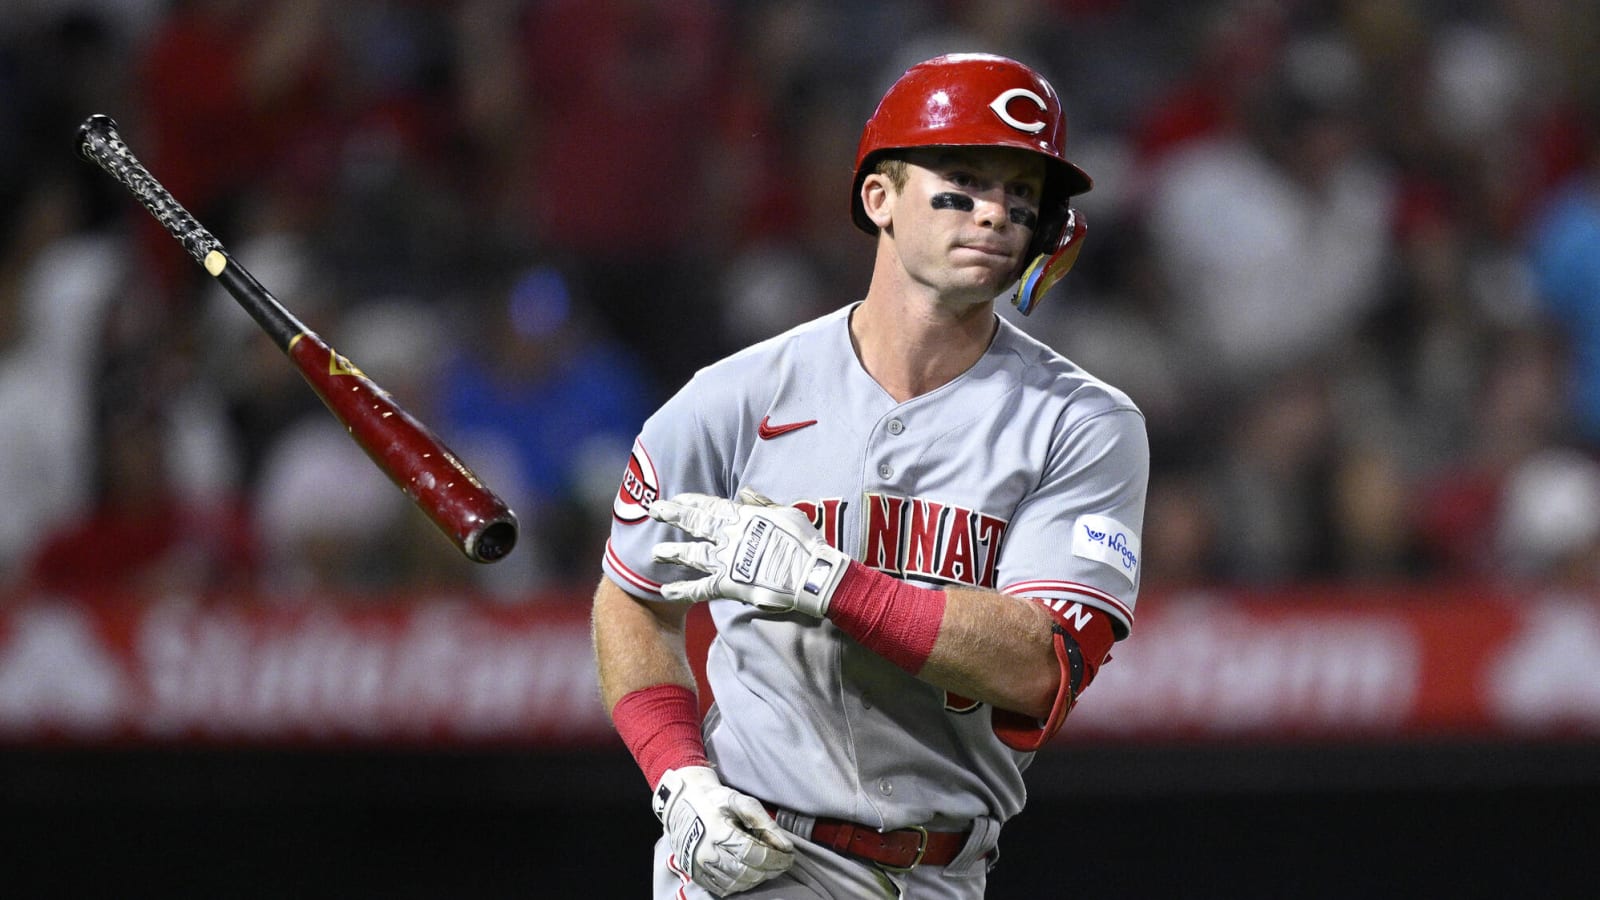 Reds shortstop being evaluated for shoulder injury